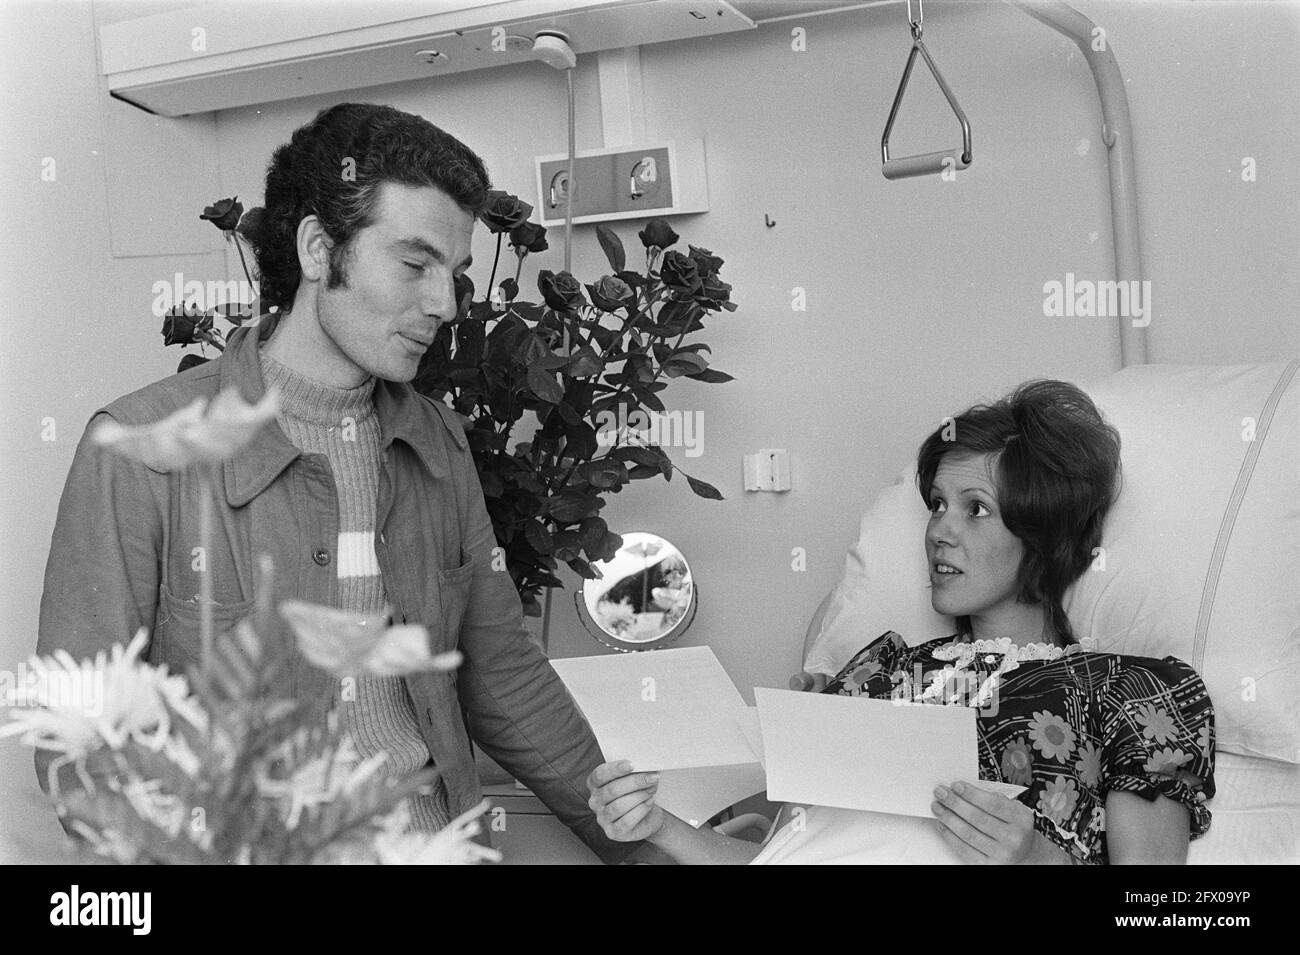 Mr. B. Snoek, father of quadruplets born last Friday, shows his wife C.J. Snoek-Bakker the birth certificates, November 14, 1972, PARENTS, quadruplets, The Netherlands, 20th century press agency photo, news to remember, documentary, historic photography 1945-1990, visual stories, human history of the Twentieth Century, capturing moments in time Stock Photo